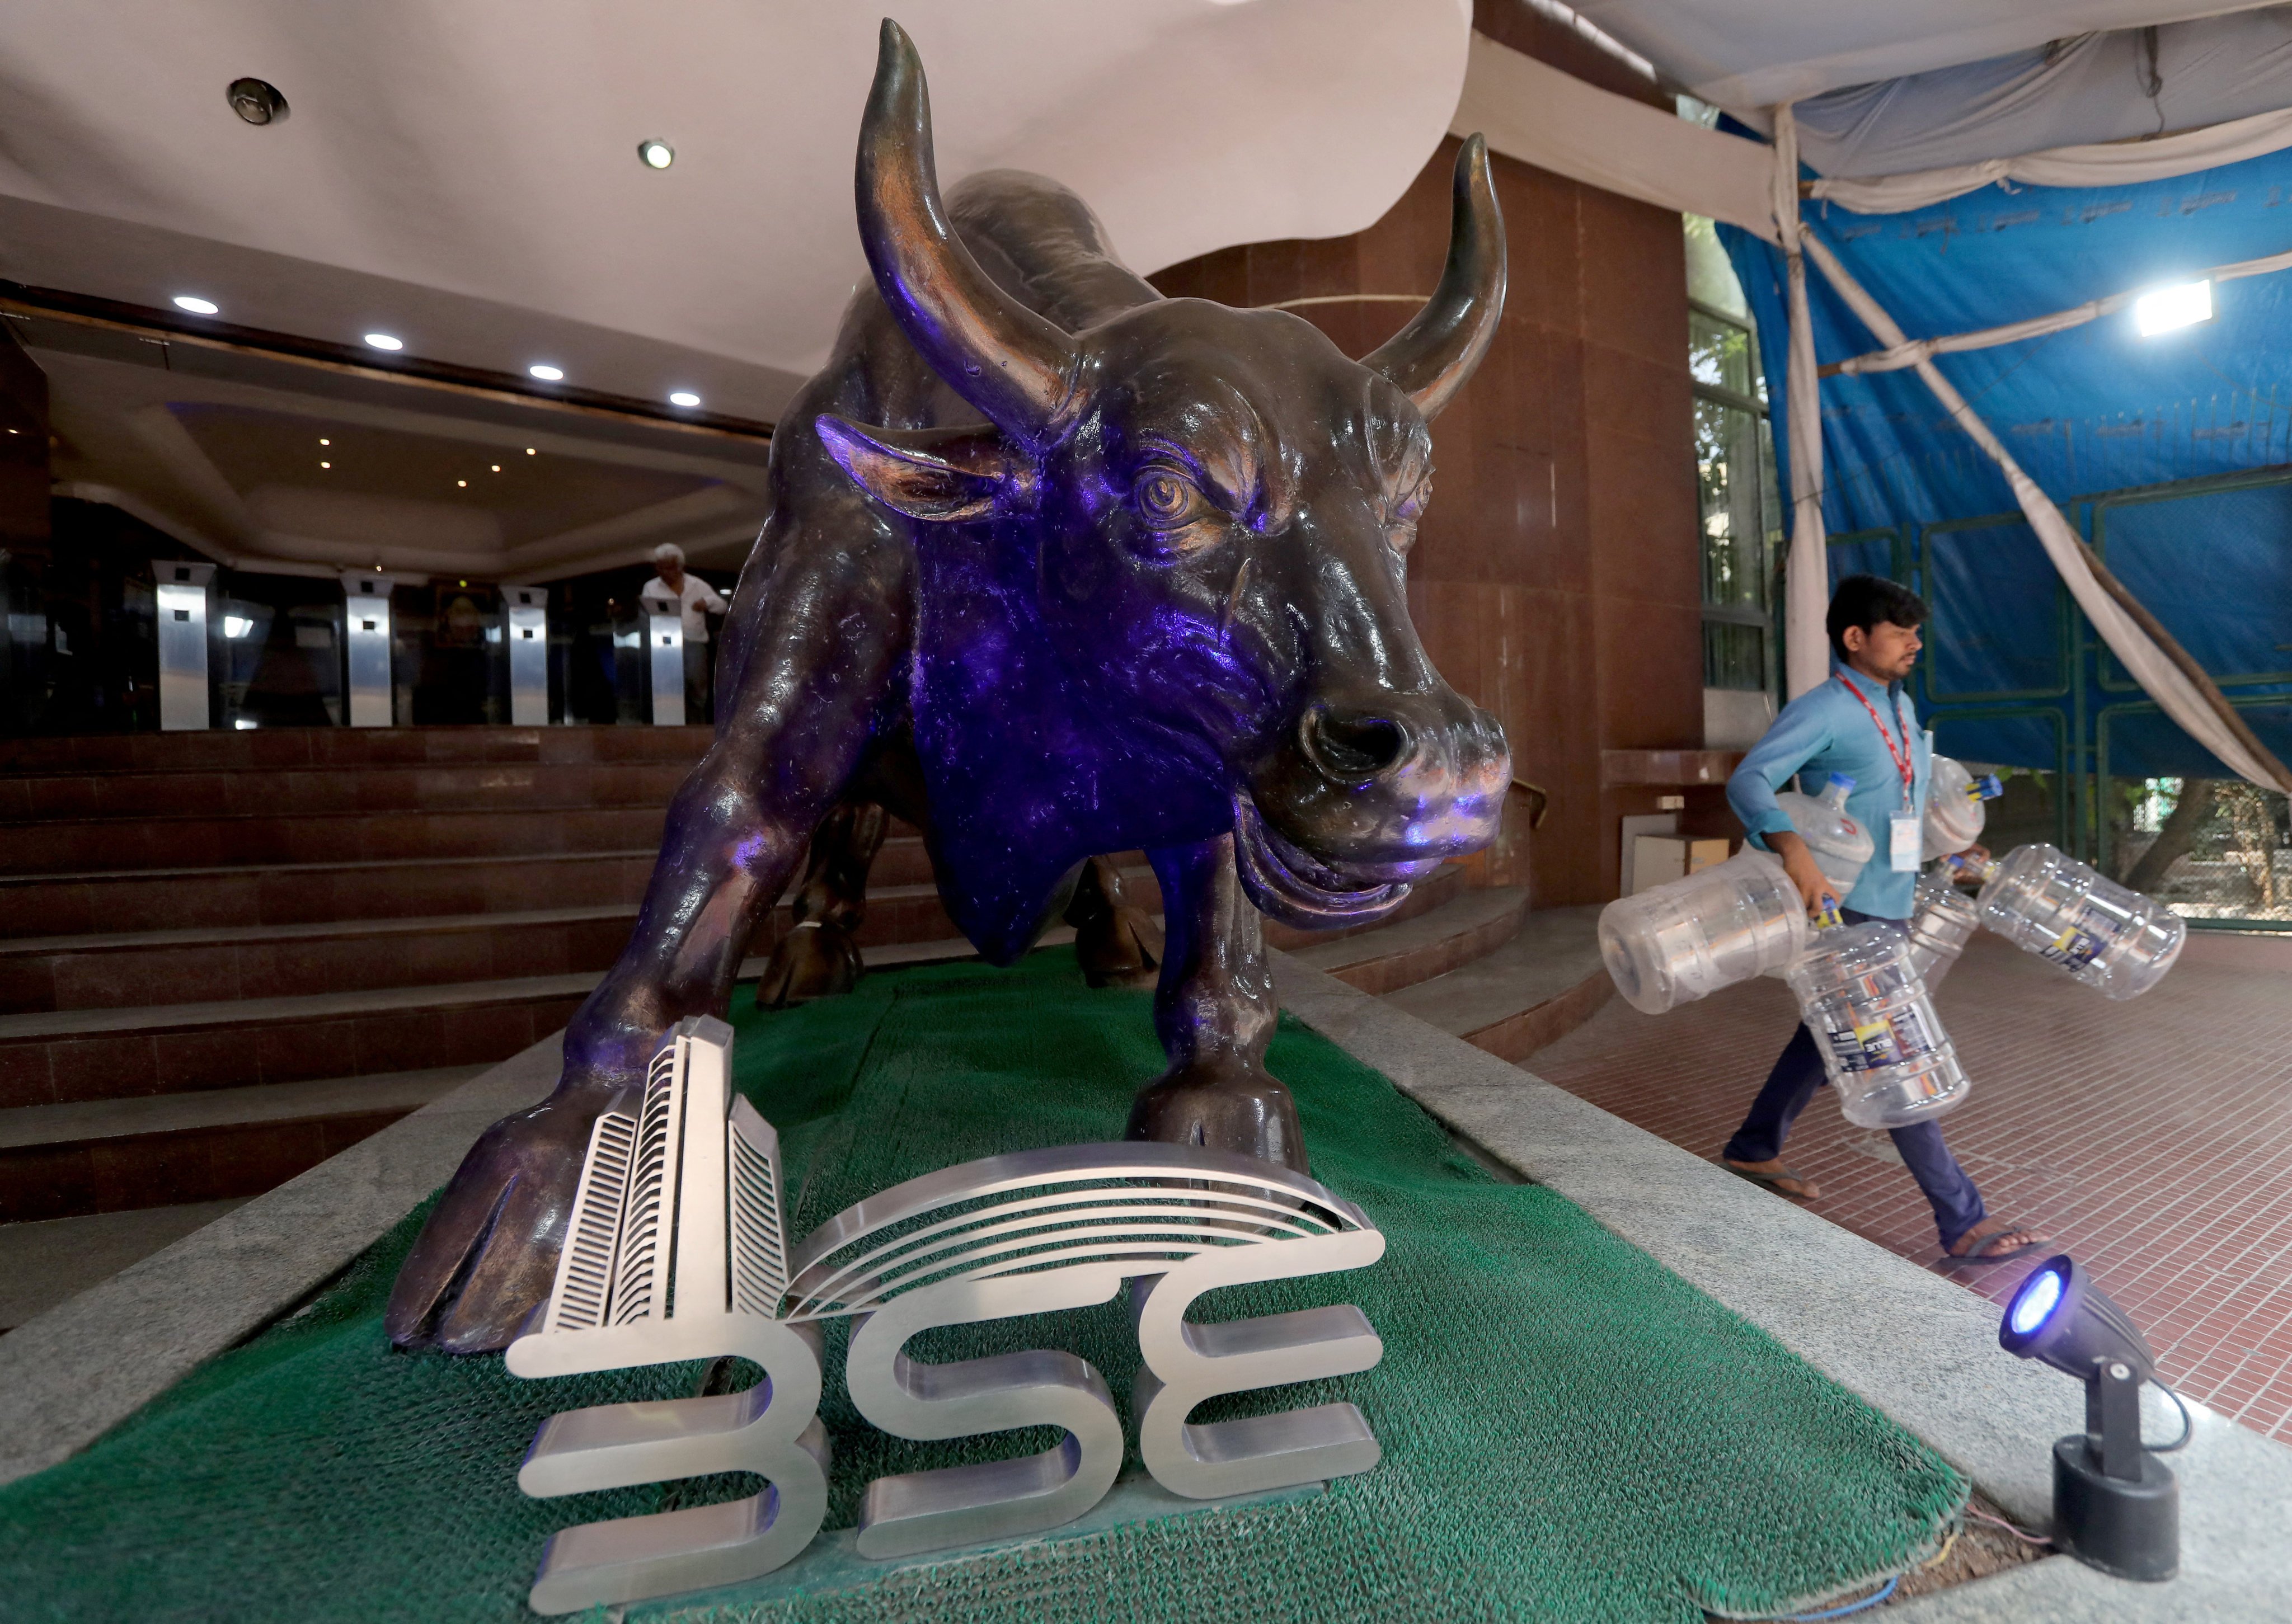 A man carries empty water bottles past a bronze bull statue inside the premises of the Bombay Stock Exchange in Mumbai on February 1, 2023. Photo: Reuters